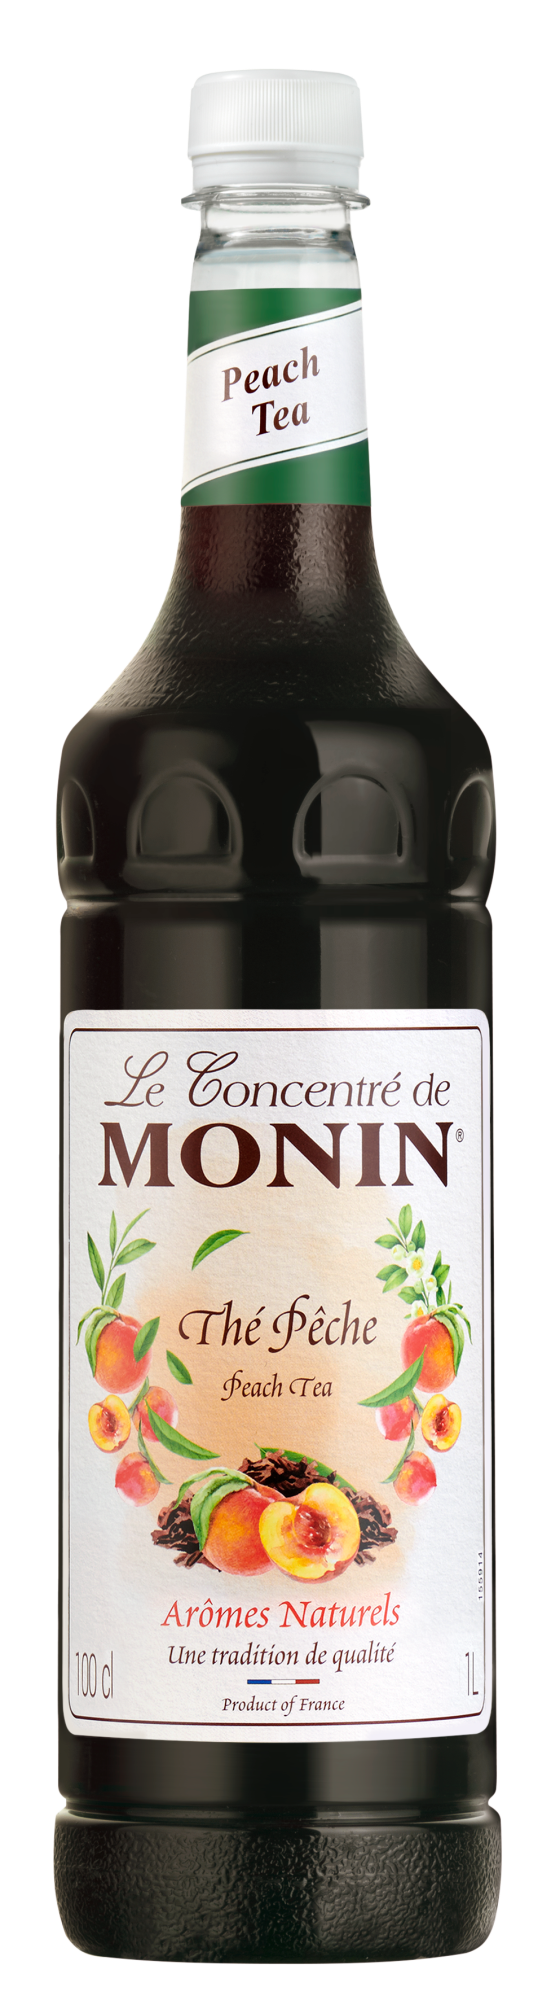 Buy MONIN Peach Tea Concentrate. It captures the perfect balance of sweet peaches with the tannin flavours of black tea.